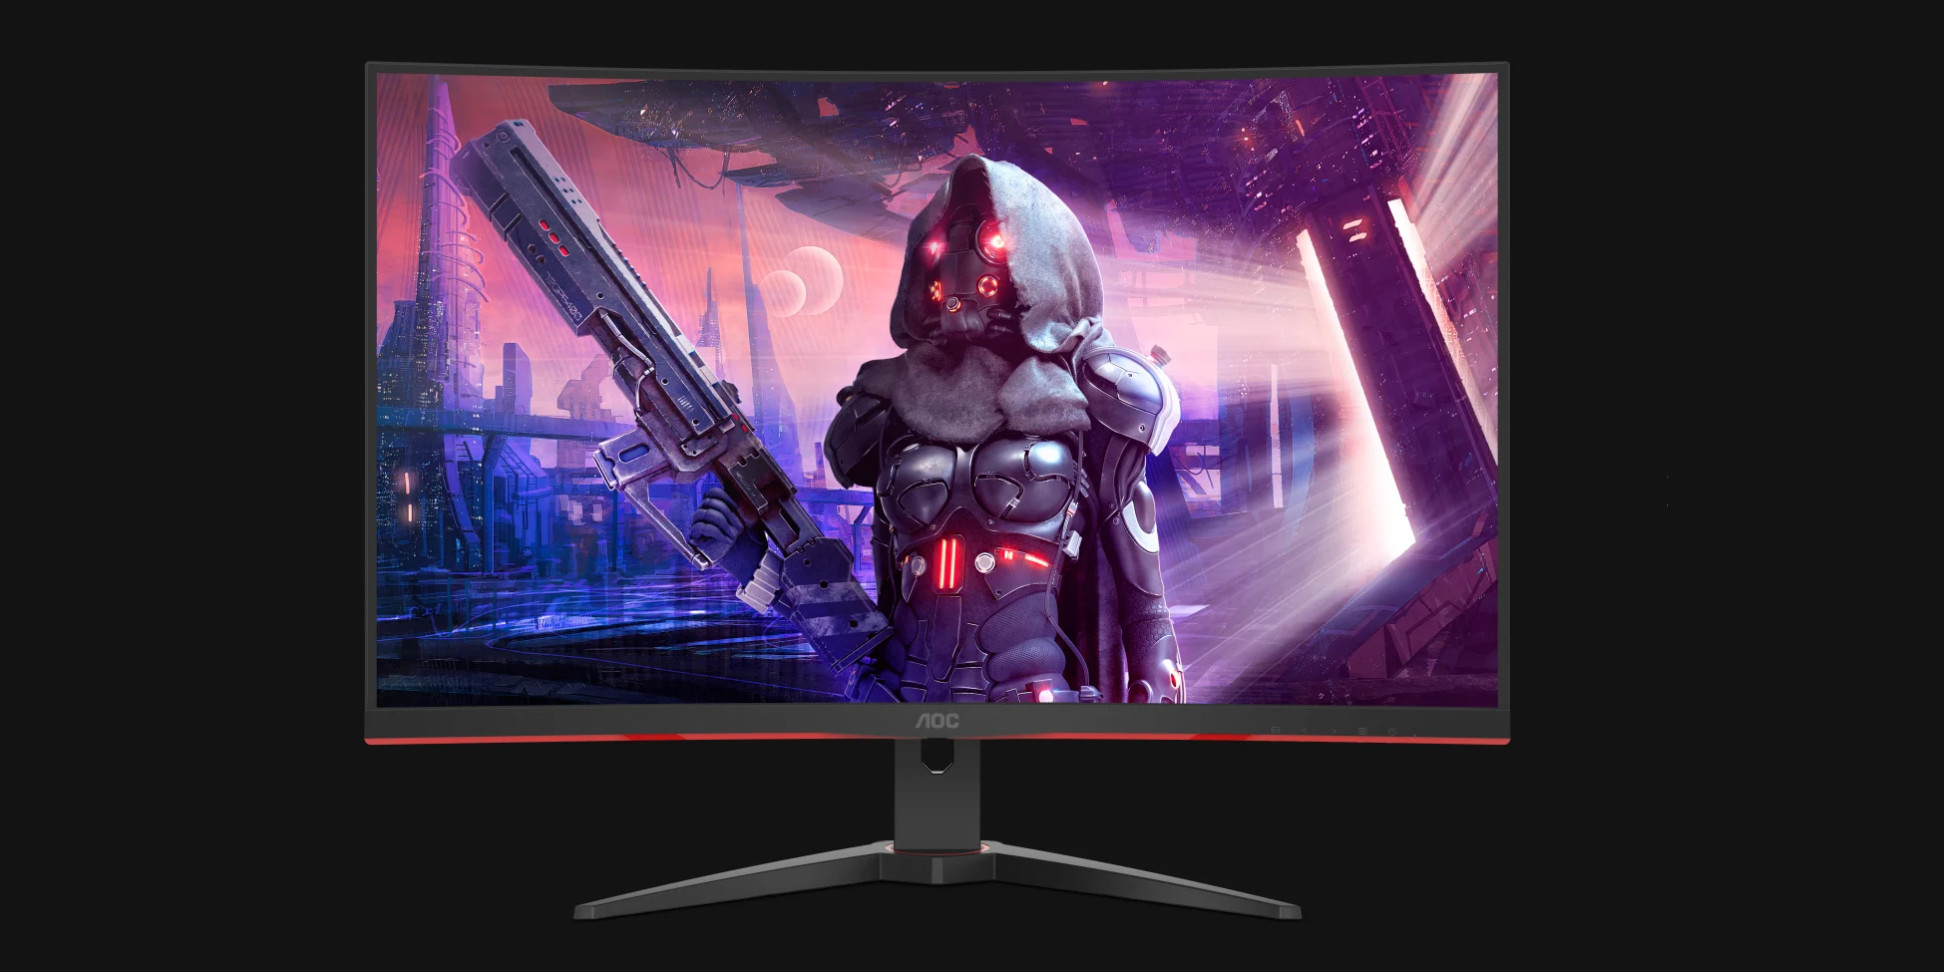 Aoc Unleashes New Curved Gaming Monitor With 165hz Refresh Rate In Cq32g2se Blur Busters